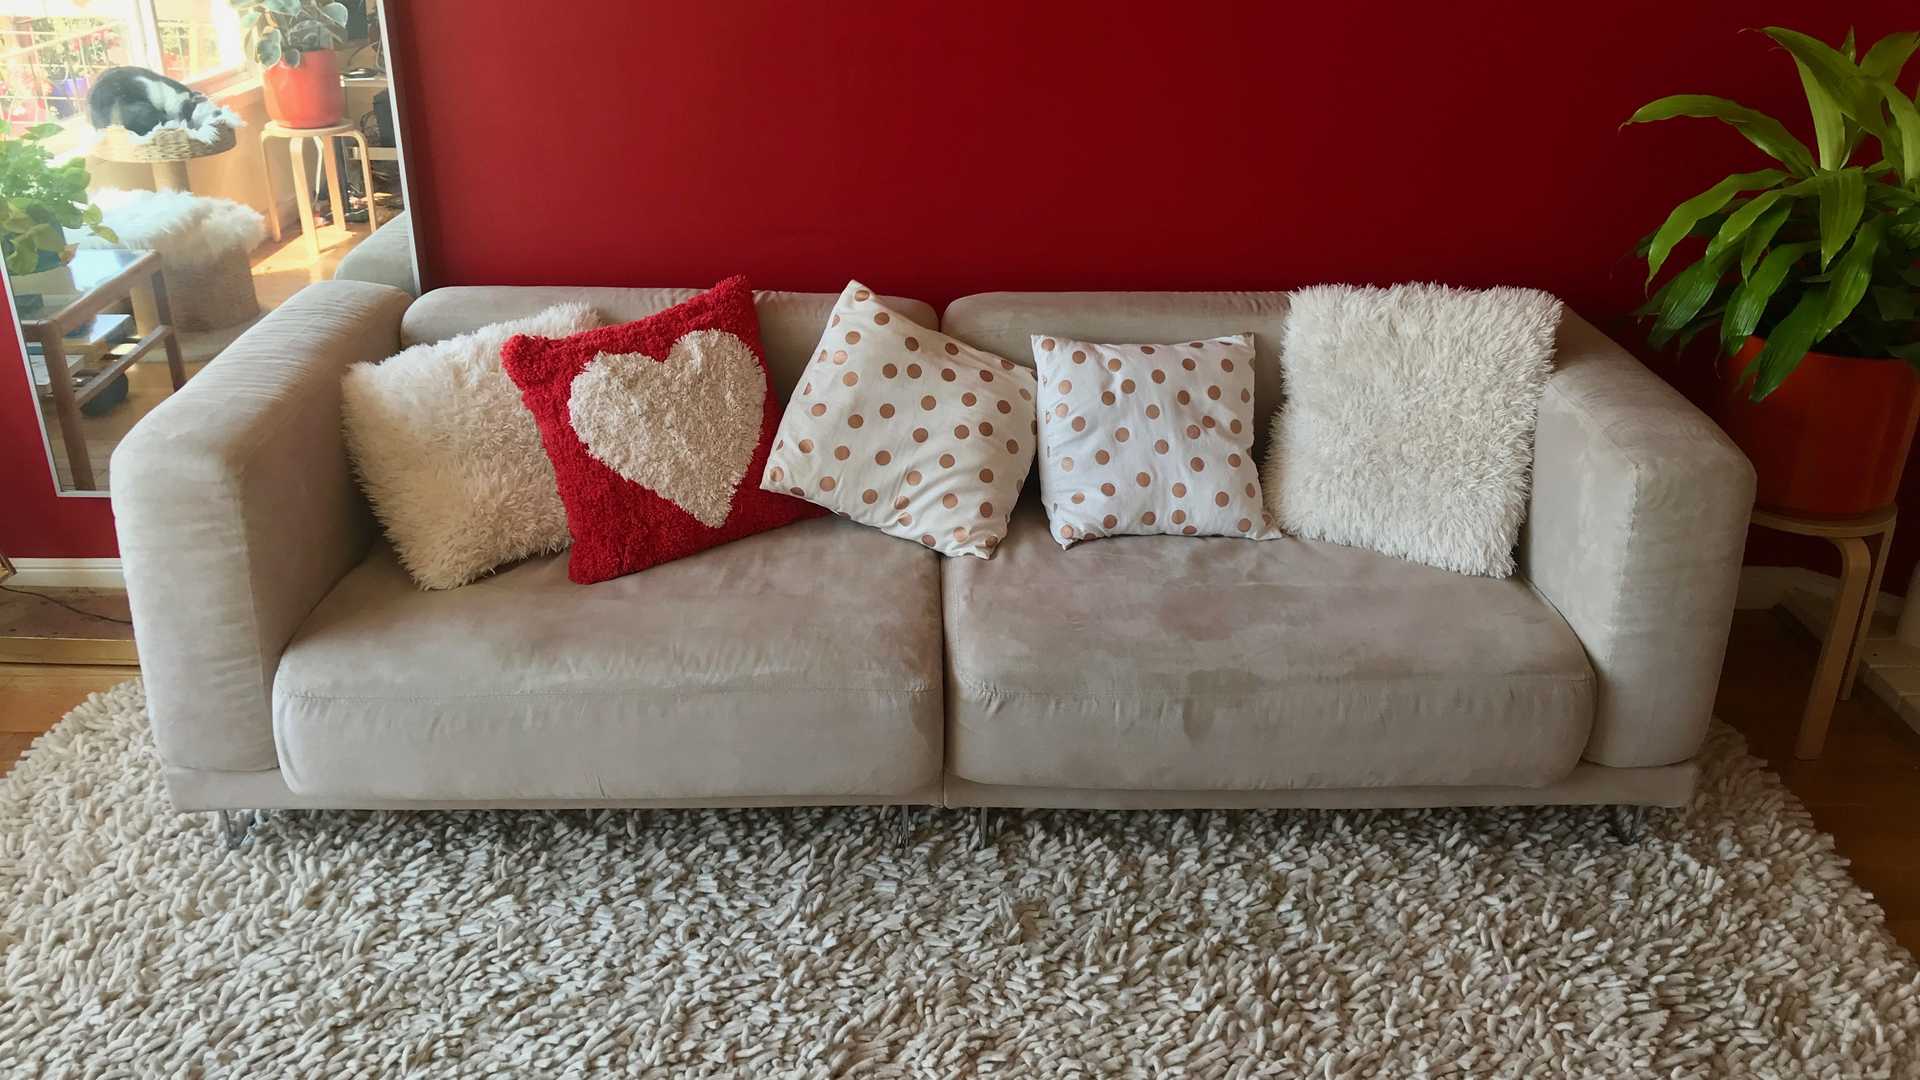 banner image: a sofa in front of a red wall